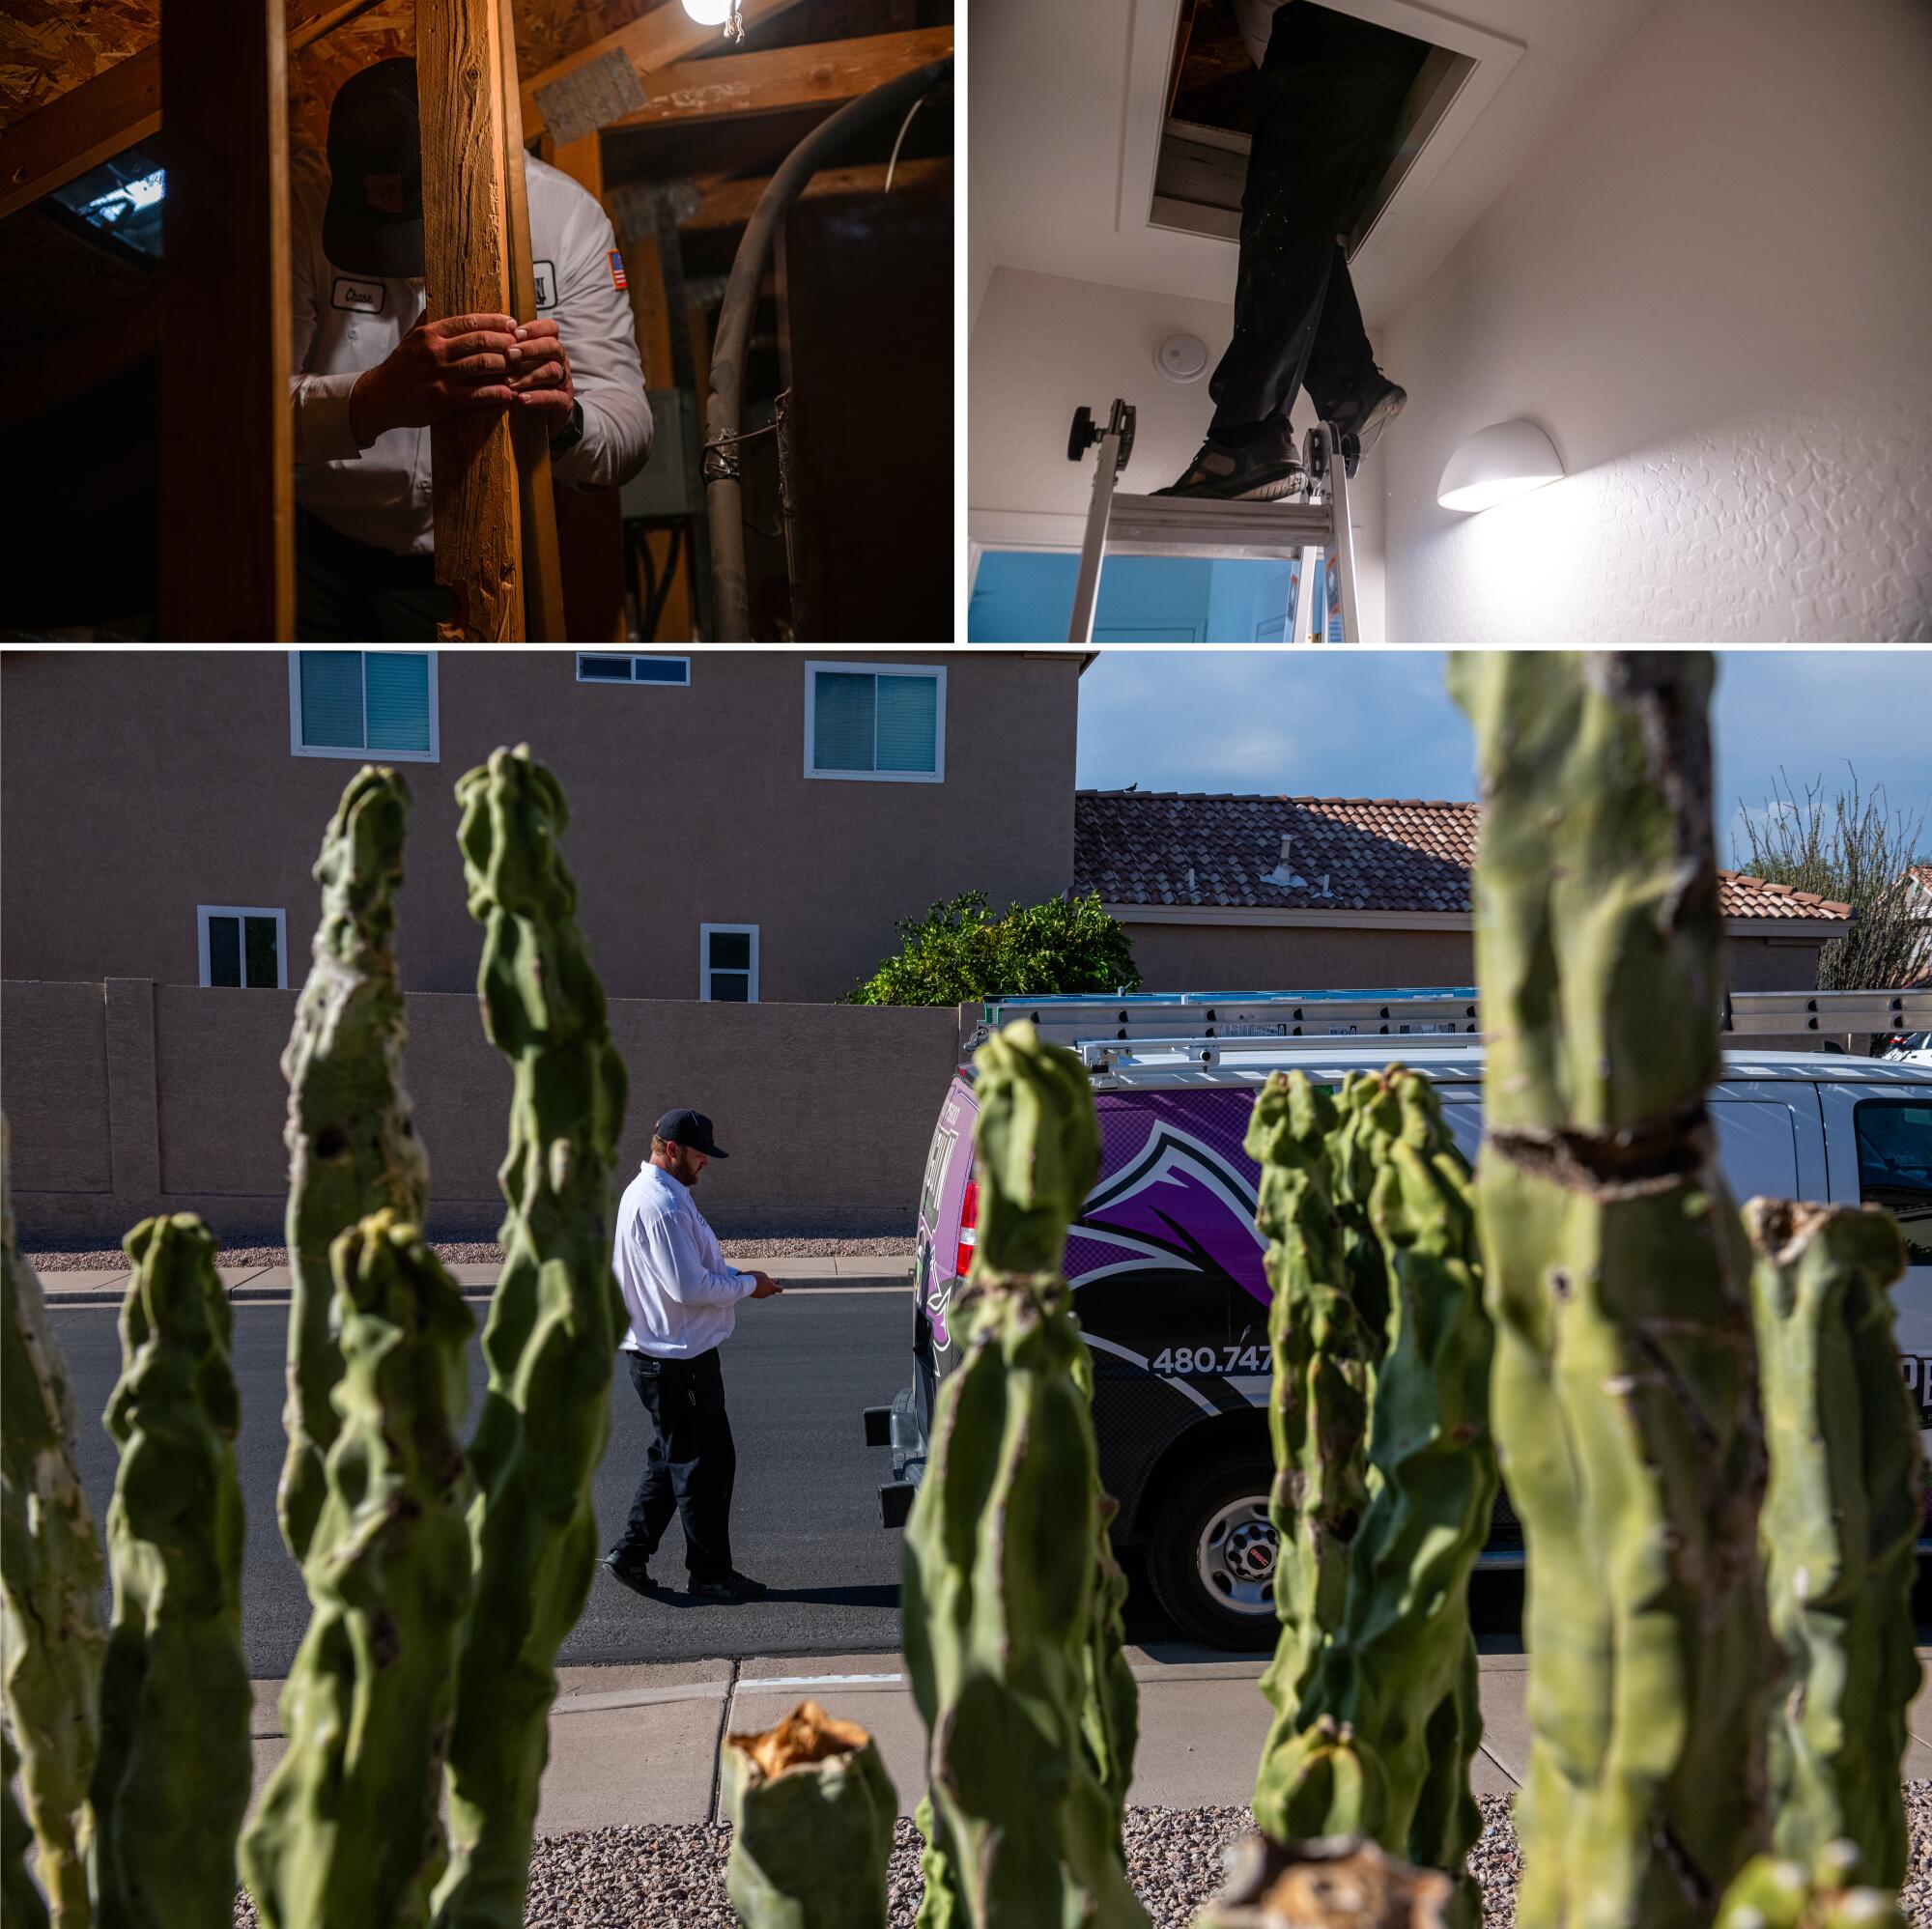 Clockwise from top left, a man climbing up a ladder, a man going through an attic opening and a man outside a home 